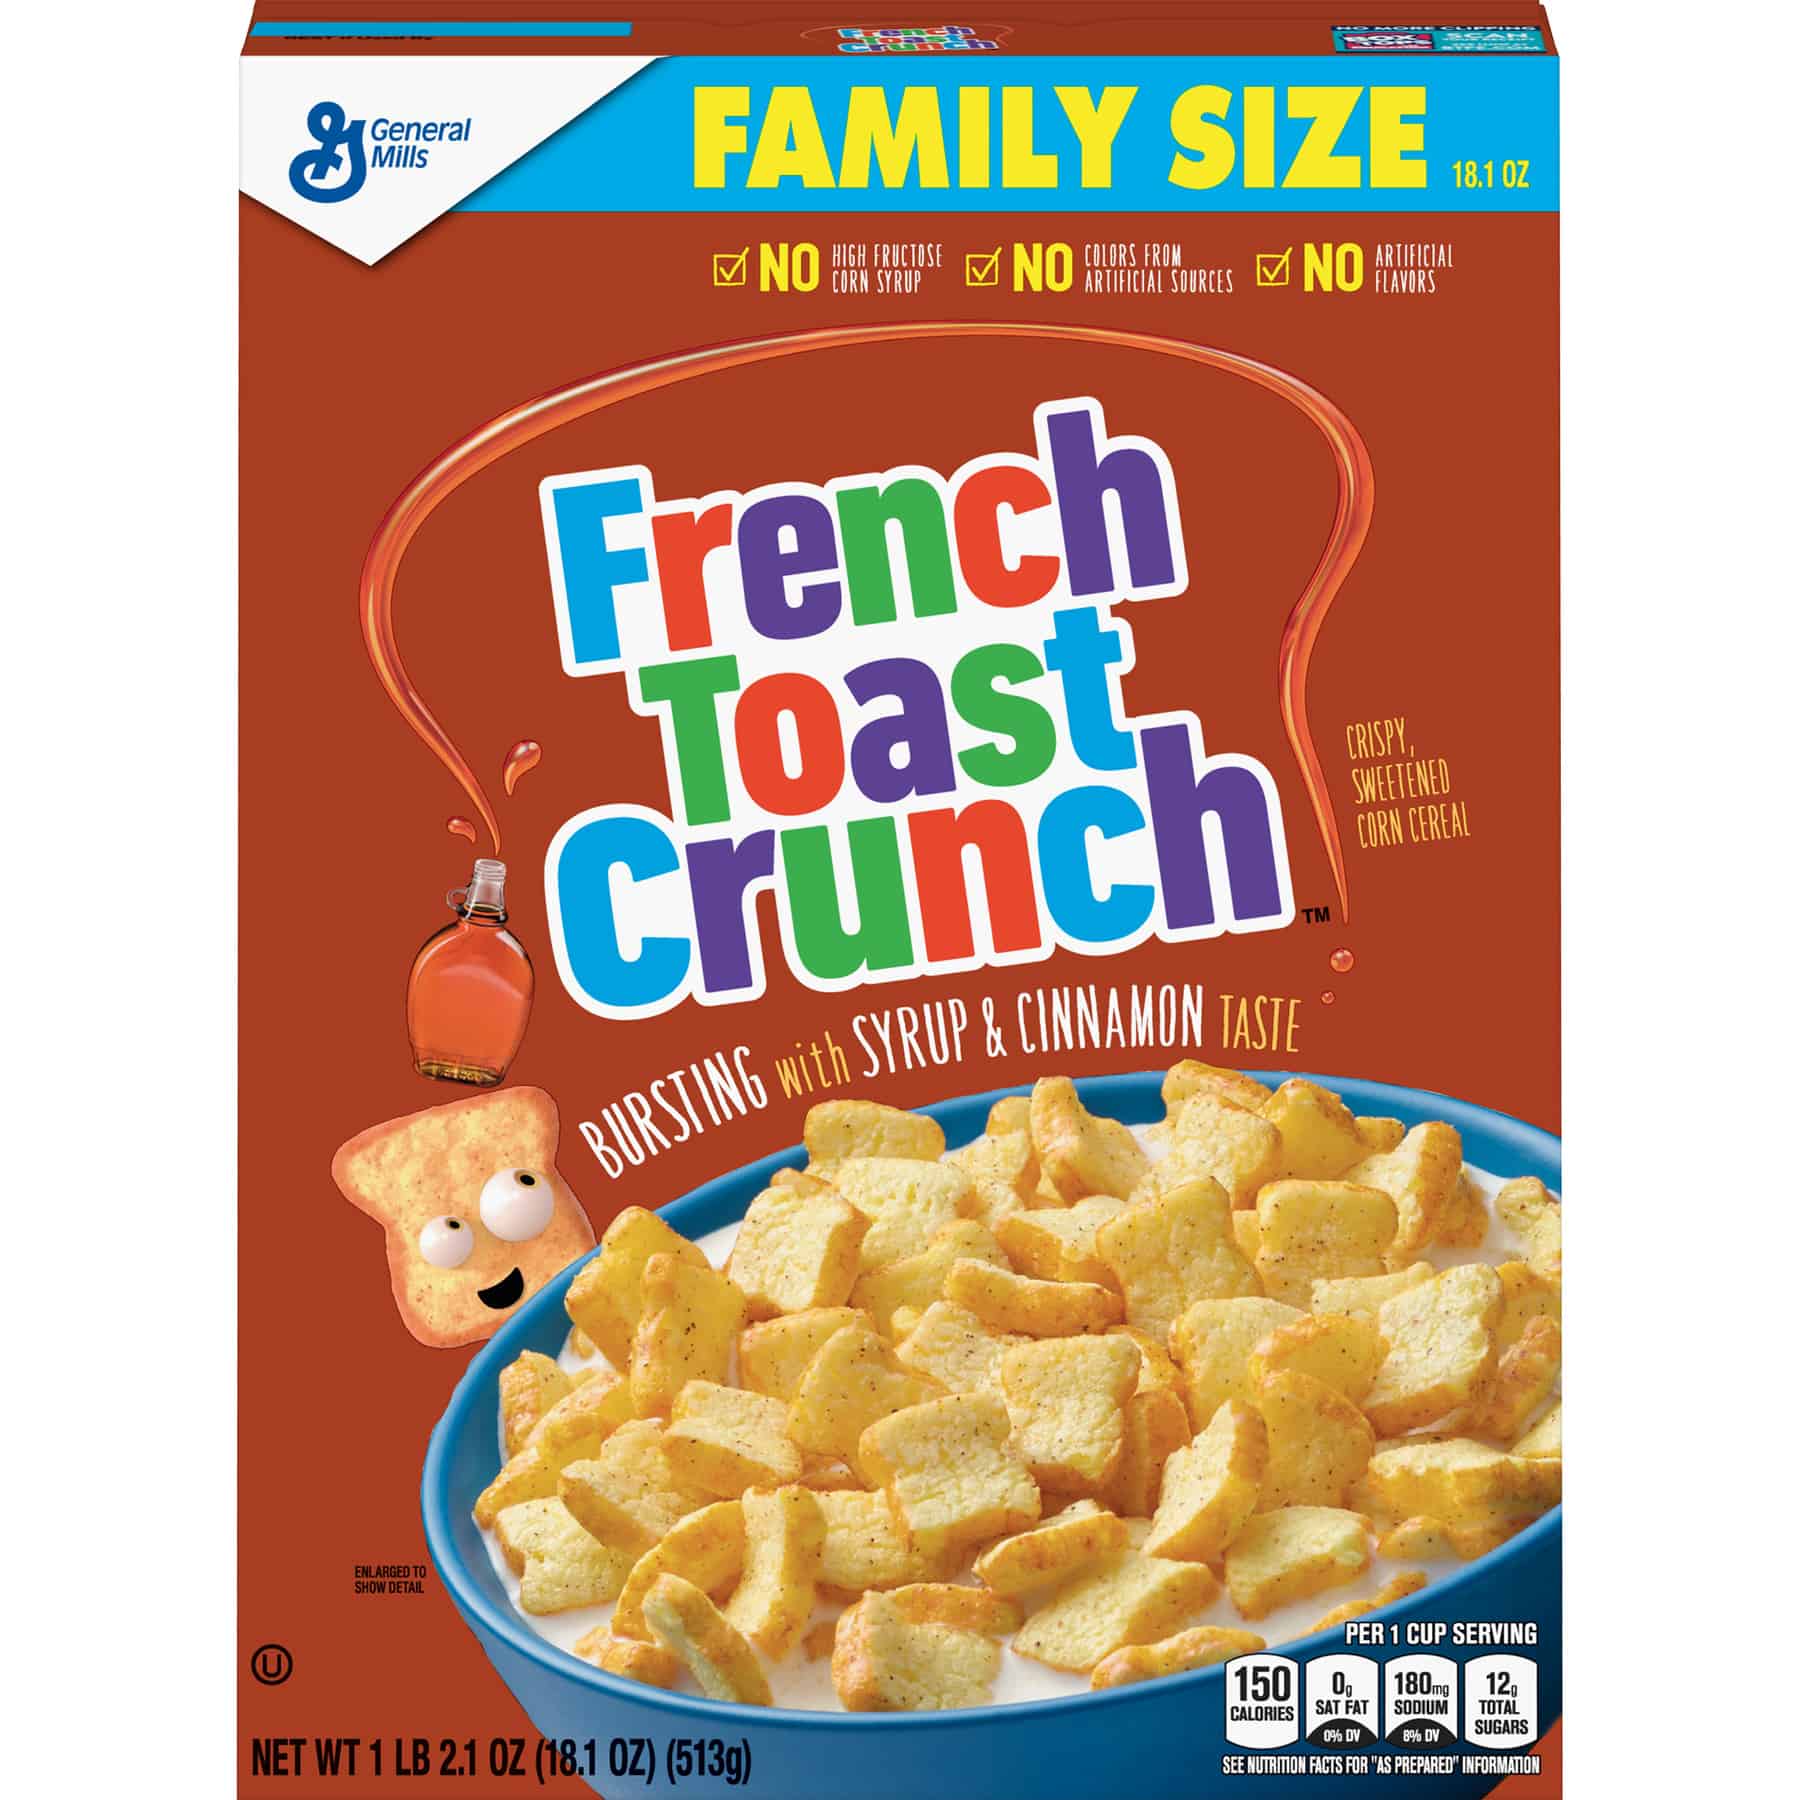 General Mills, French Toast Crunch, Family Size, 18.1 oz